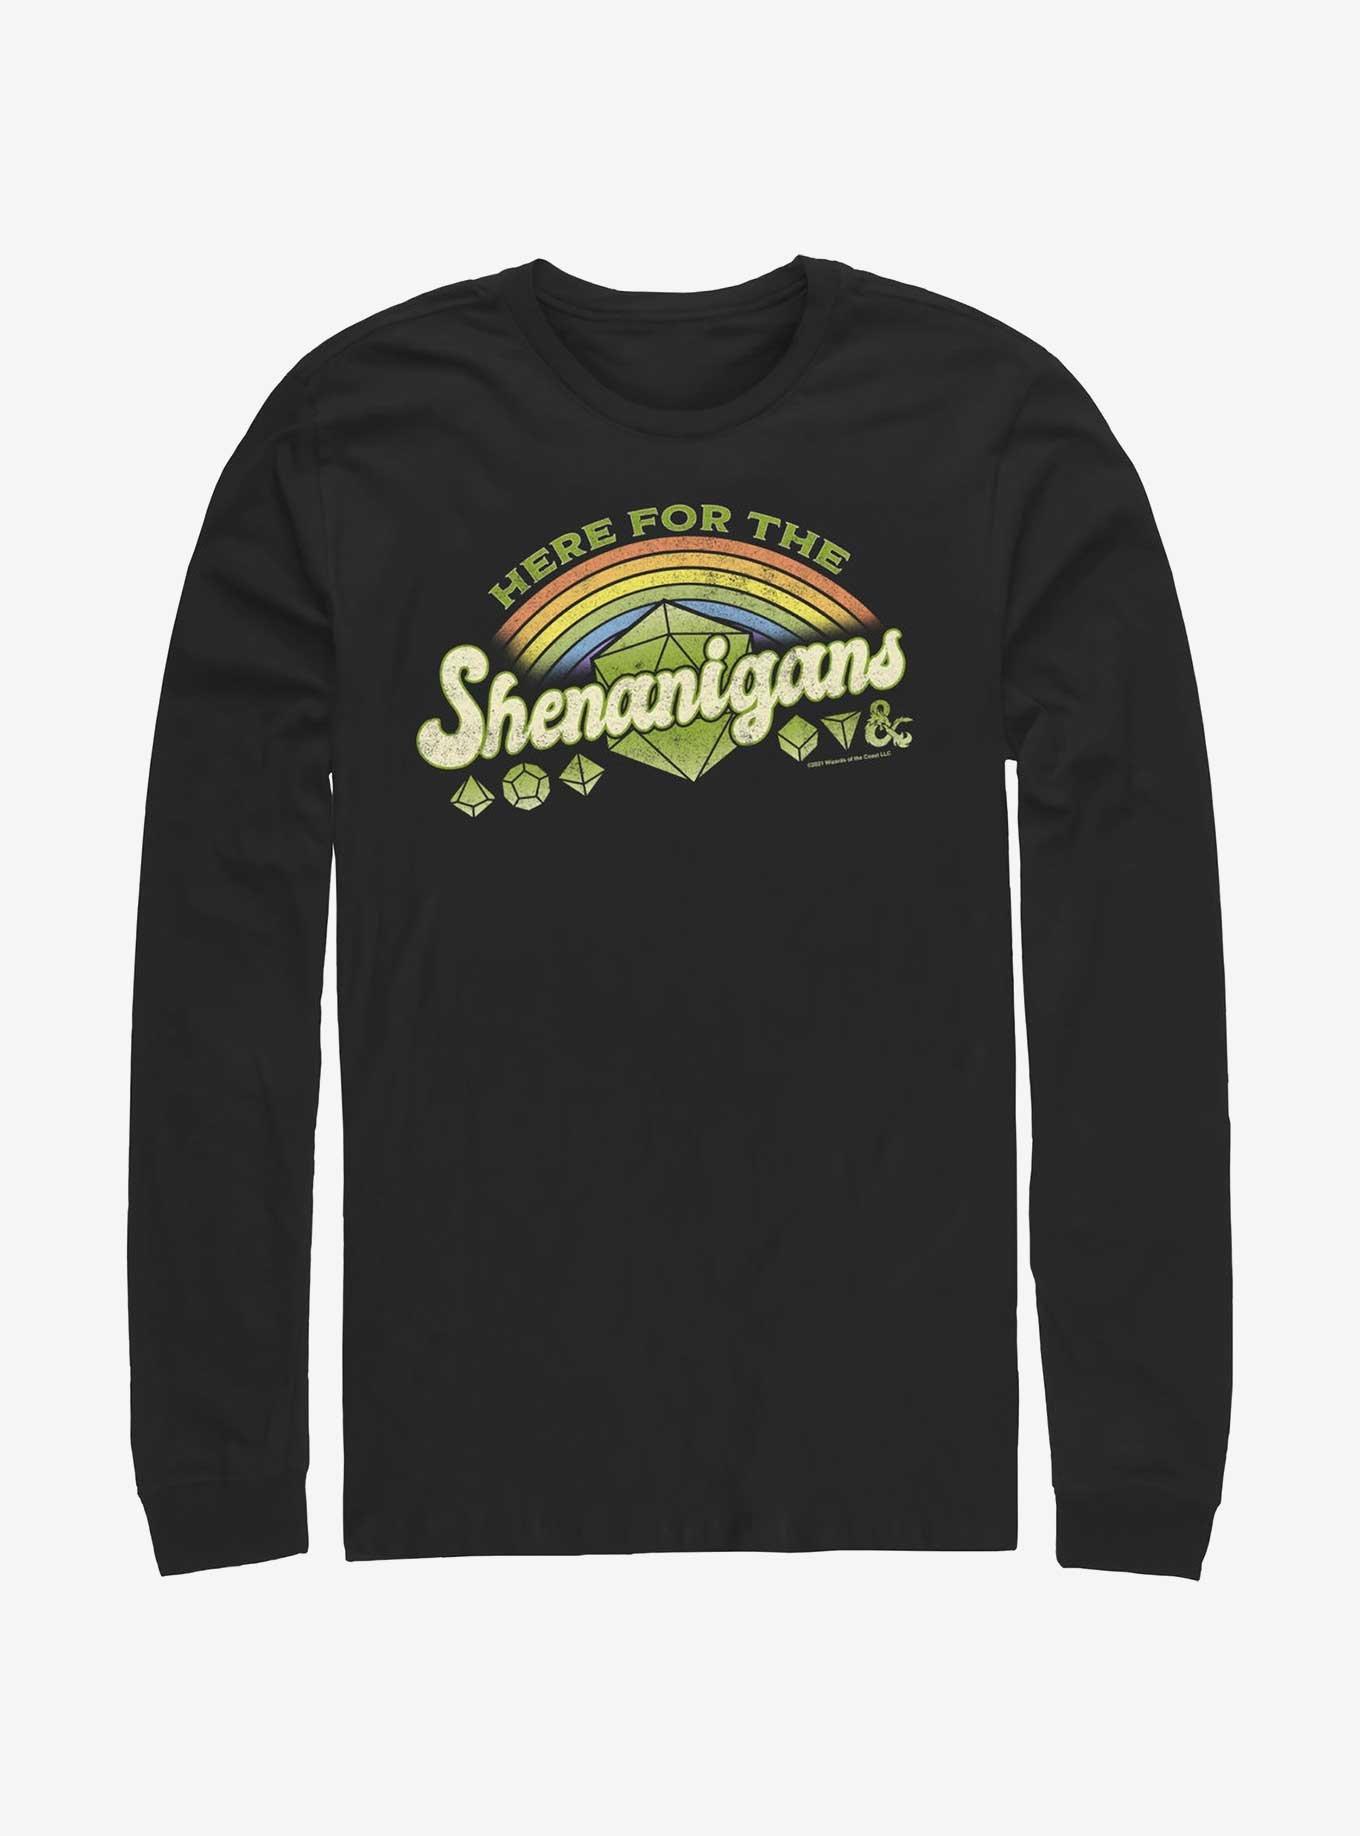 Dungeons And Dragons Here For Shenanigans Long-Sleeve T-Shirt, BLACK, hi-res